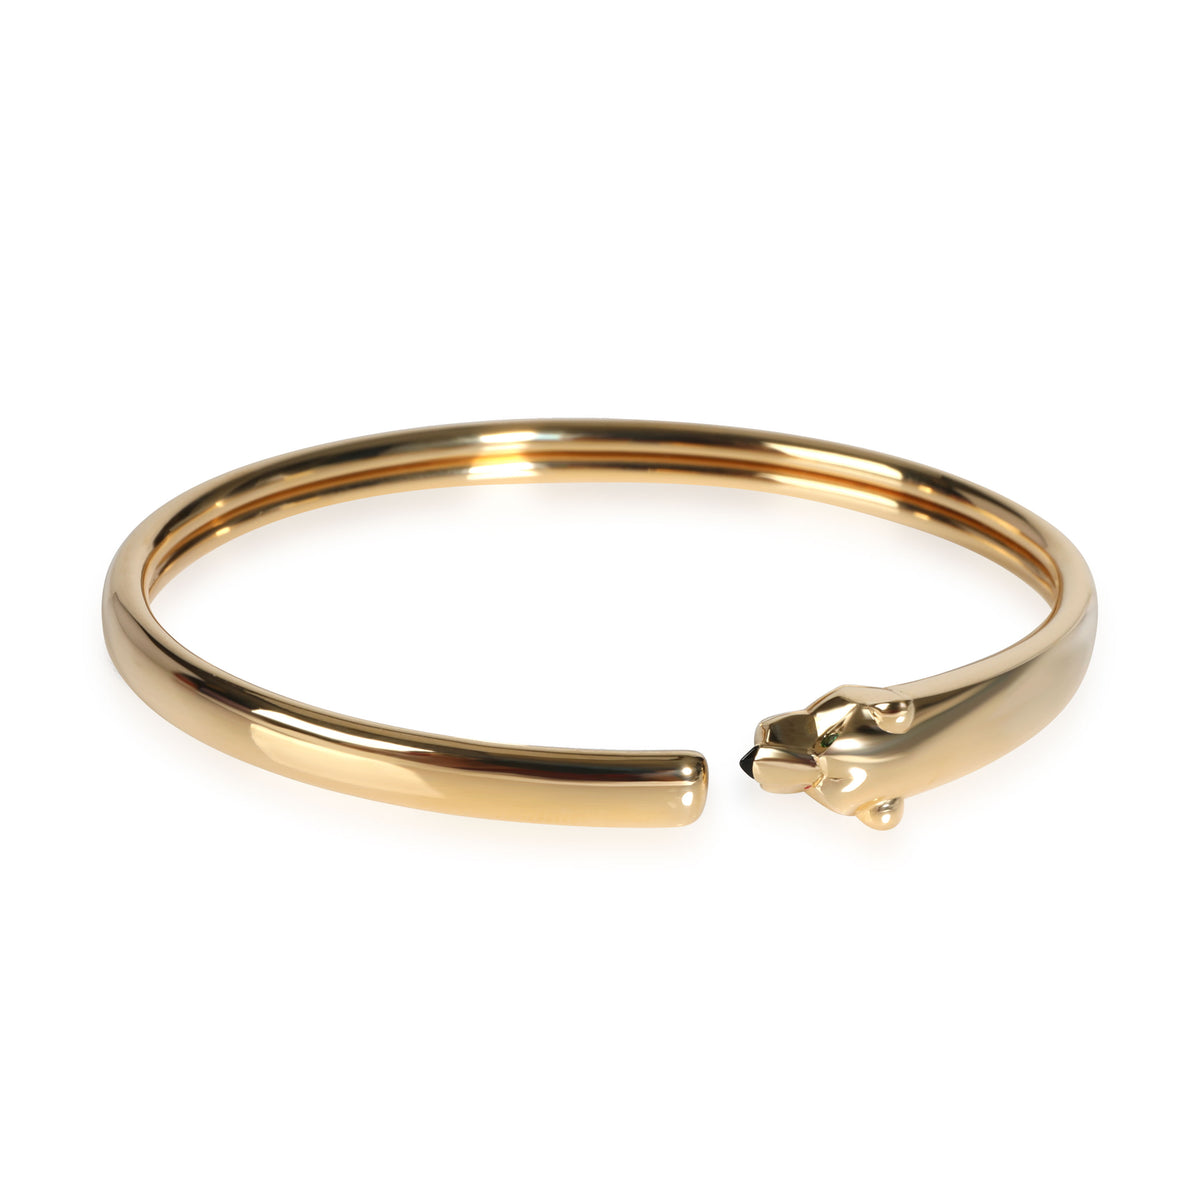 Cartier Panthere Bangle in 18K Yellow Gold